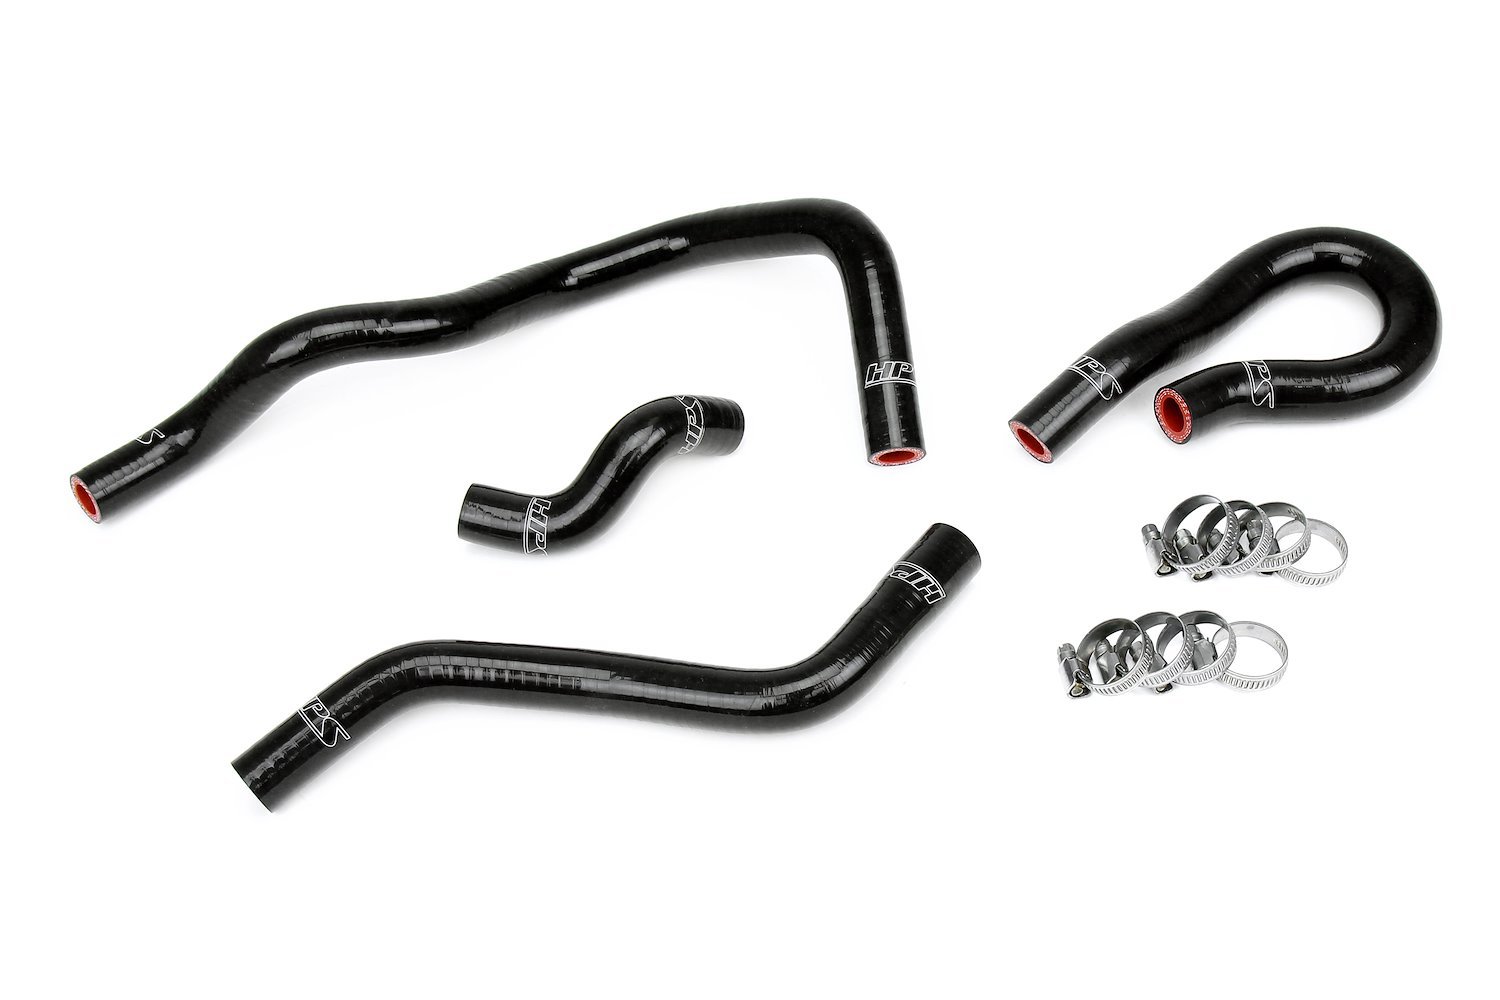 57-1773-BLK Heater Hose Kit, 3-Ply Reinforced Silicone, Replaces Rubber Heater Coolant & Water Bypass Hoses